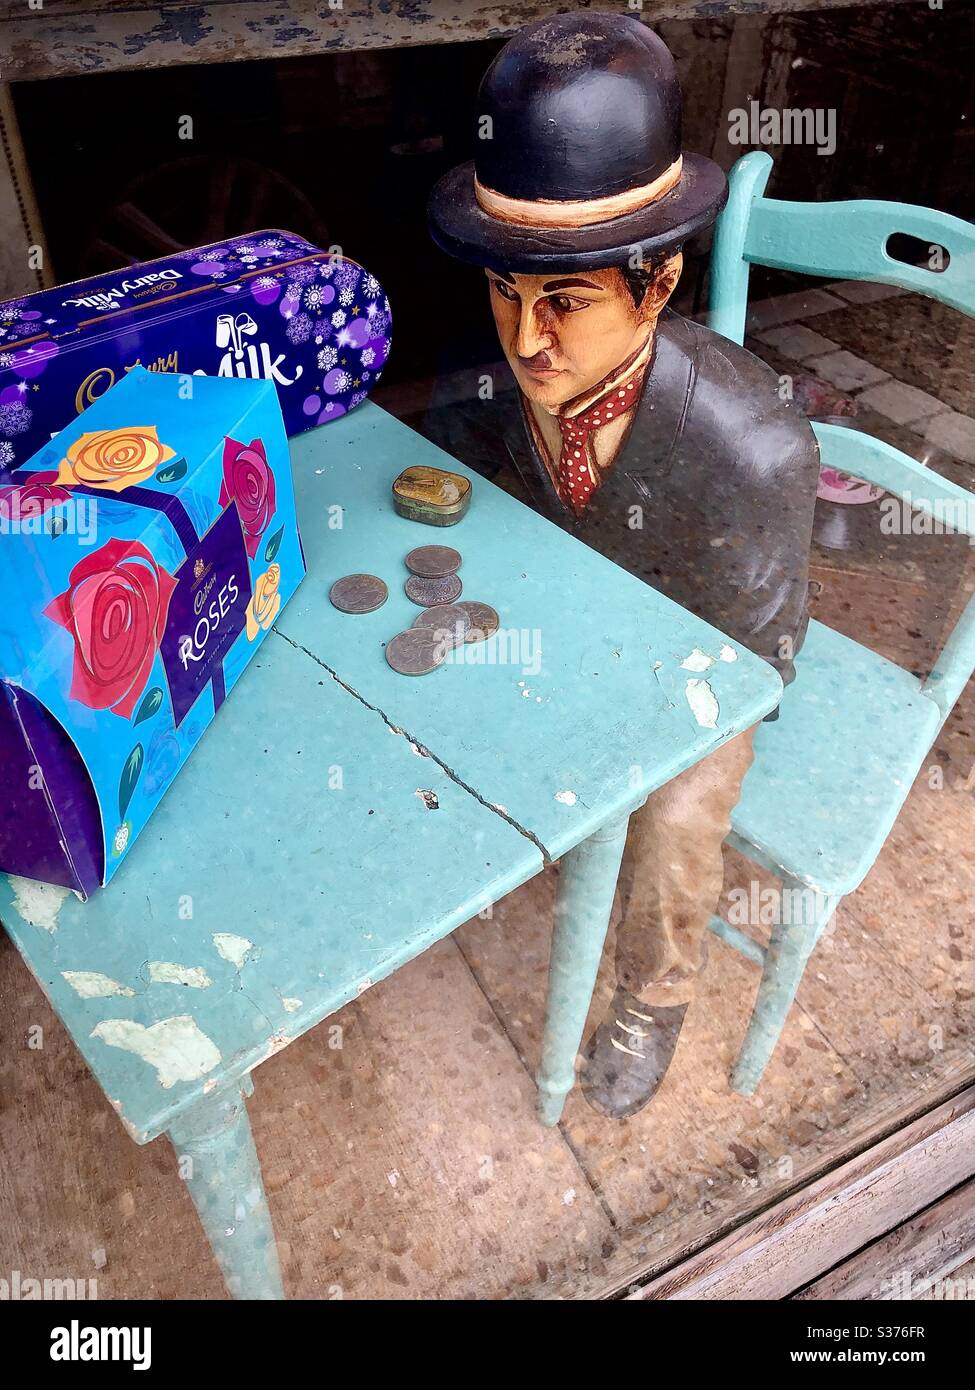 Miniature maquette of man sitting at table in sweet shop window, Le Blanc, Indre, France. Stock Photo